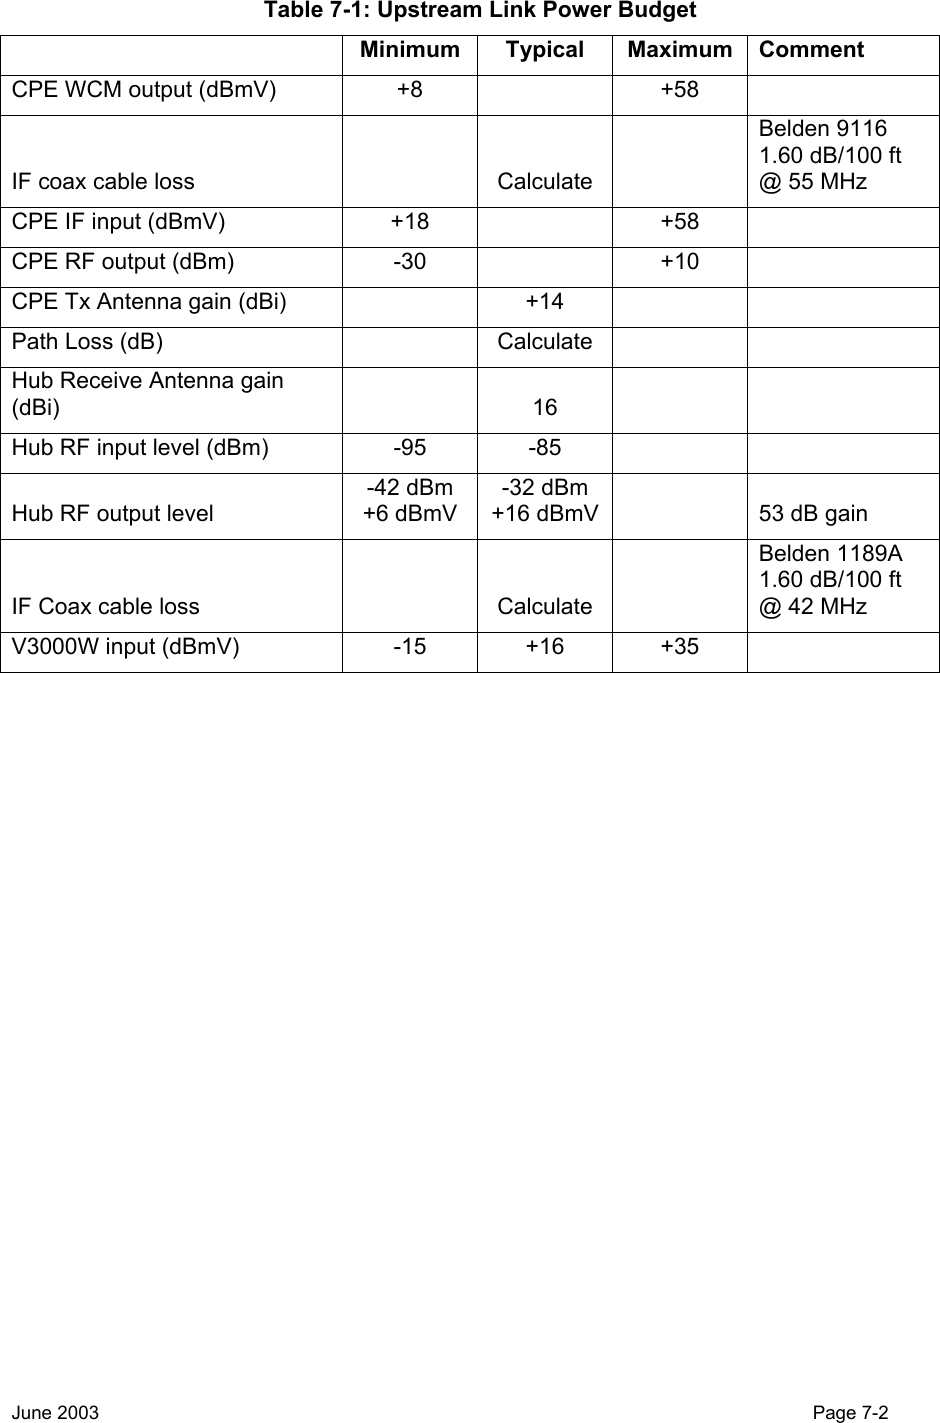  Table 7-1: Upstream Link Power Budget   Minimum Typical Maximum Comment CPE WCM output (dBmV)  +8    +58   IF coax cable loss    Calculate   Belden 9116 1.60 dB/100 ft @ 55 MHz CPE IF input (dBmV)  +18    +58   CPE RF output (dBm)  -30    +10   CPE Tx Antenna gain (dBi)    +14     Path Loss (dB)    Calculate     Hub Receive Antenna gain (dBi)   16   Hub RF input level (dBm)  -95  -85     Hub RF output level  -42 dBm +6 dBmV -32 dBm +16 dBmV    53 dB gain IF Coax cable loss    Calculate   Belden 1189A  1.60 dB/100 ft @ 42 MHz V3000W input (dBmV)  -15  +16  +35    June 2003                                                                                                                                         Page 7-2  